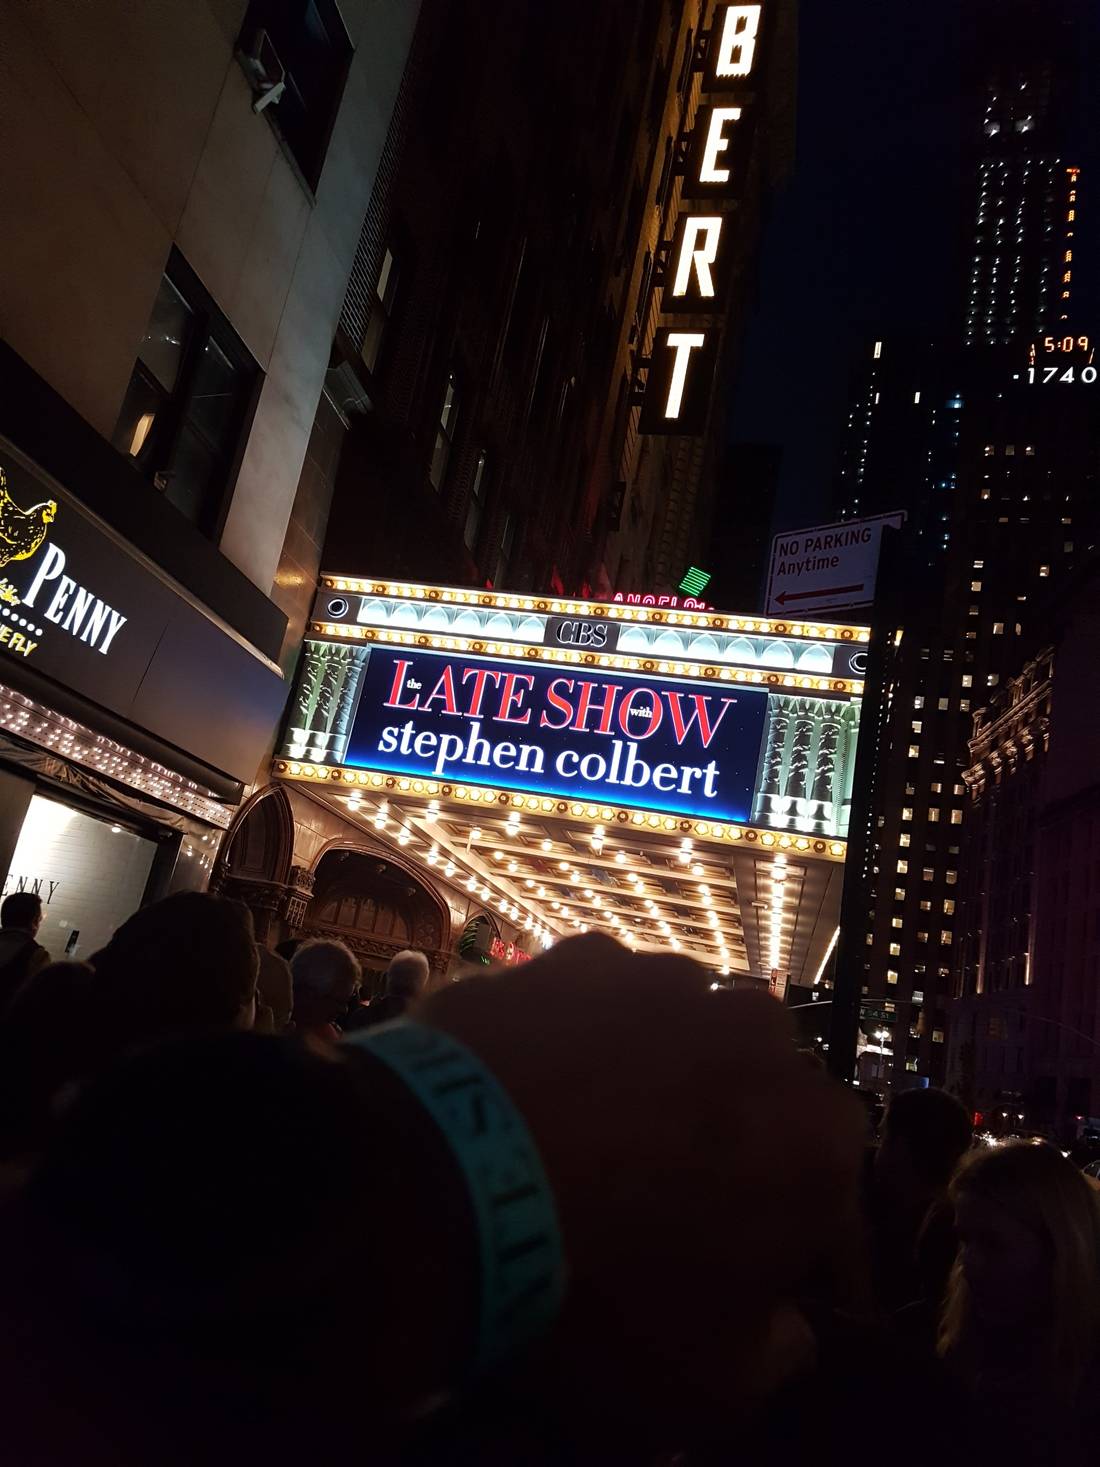 Late Show with Stephen Colbert. My first time at a Live T.V show